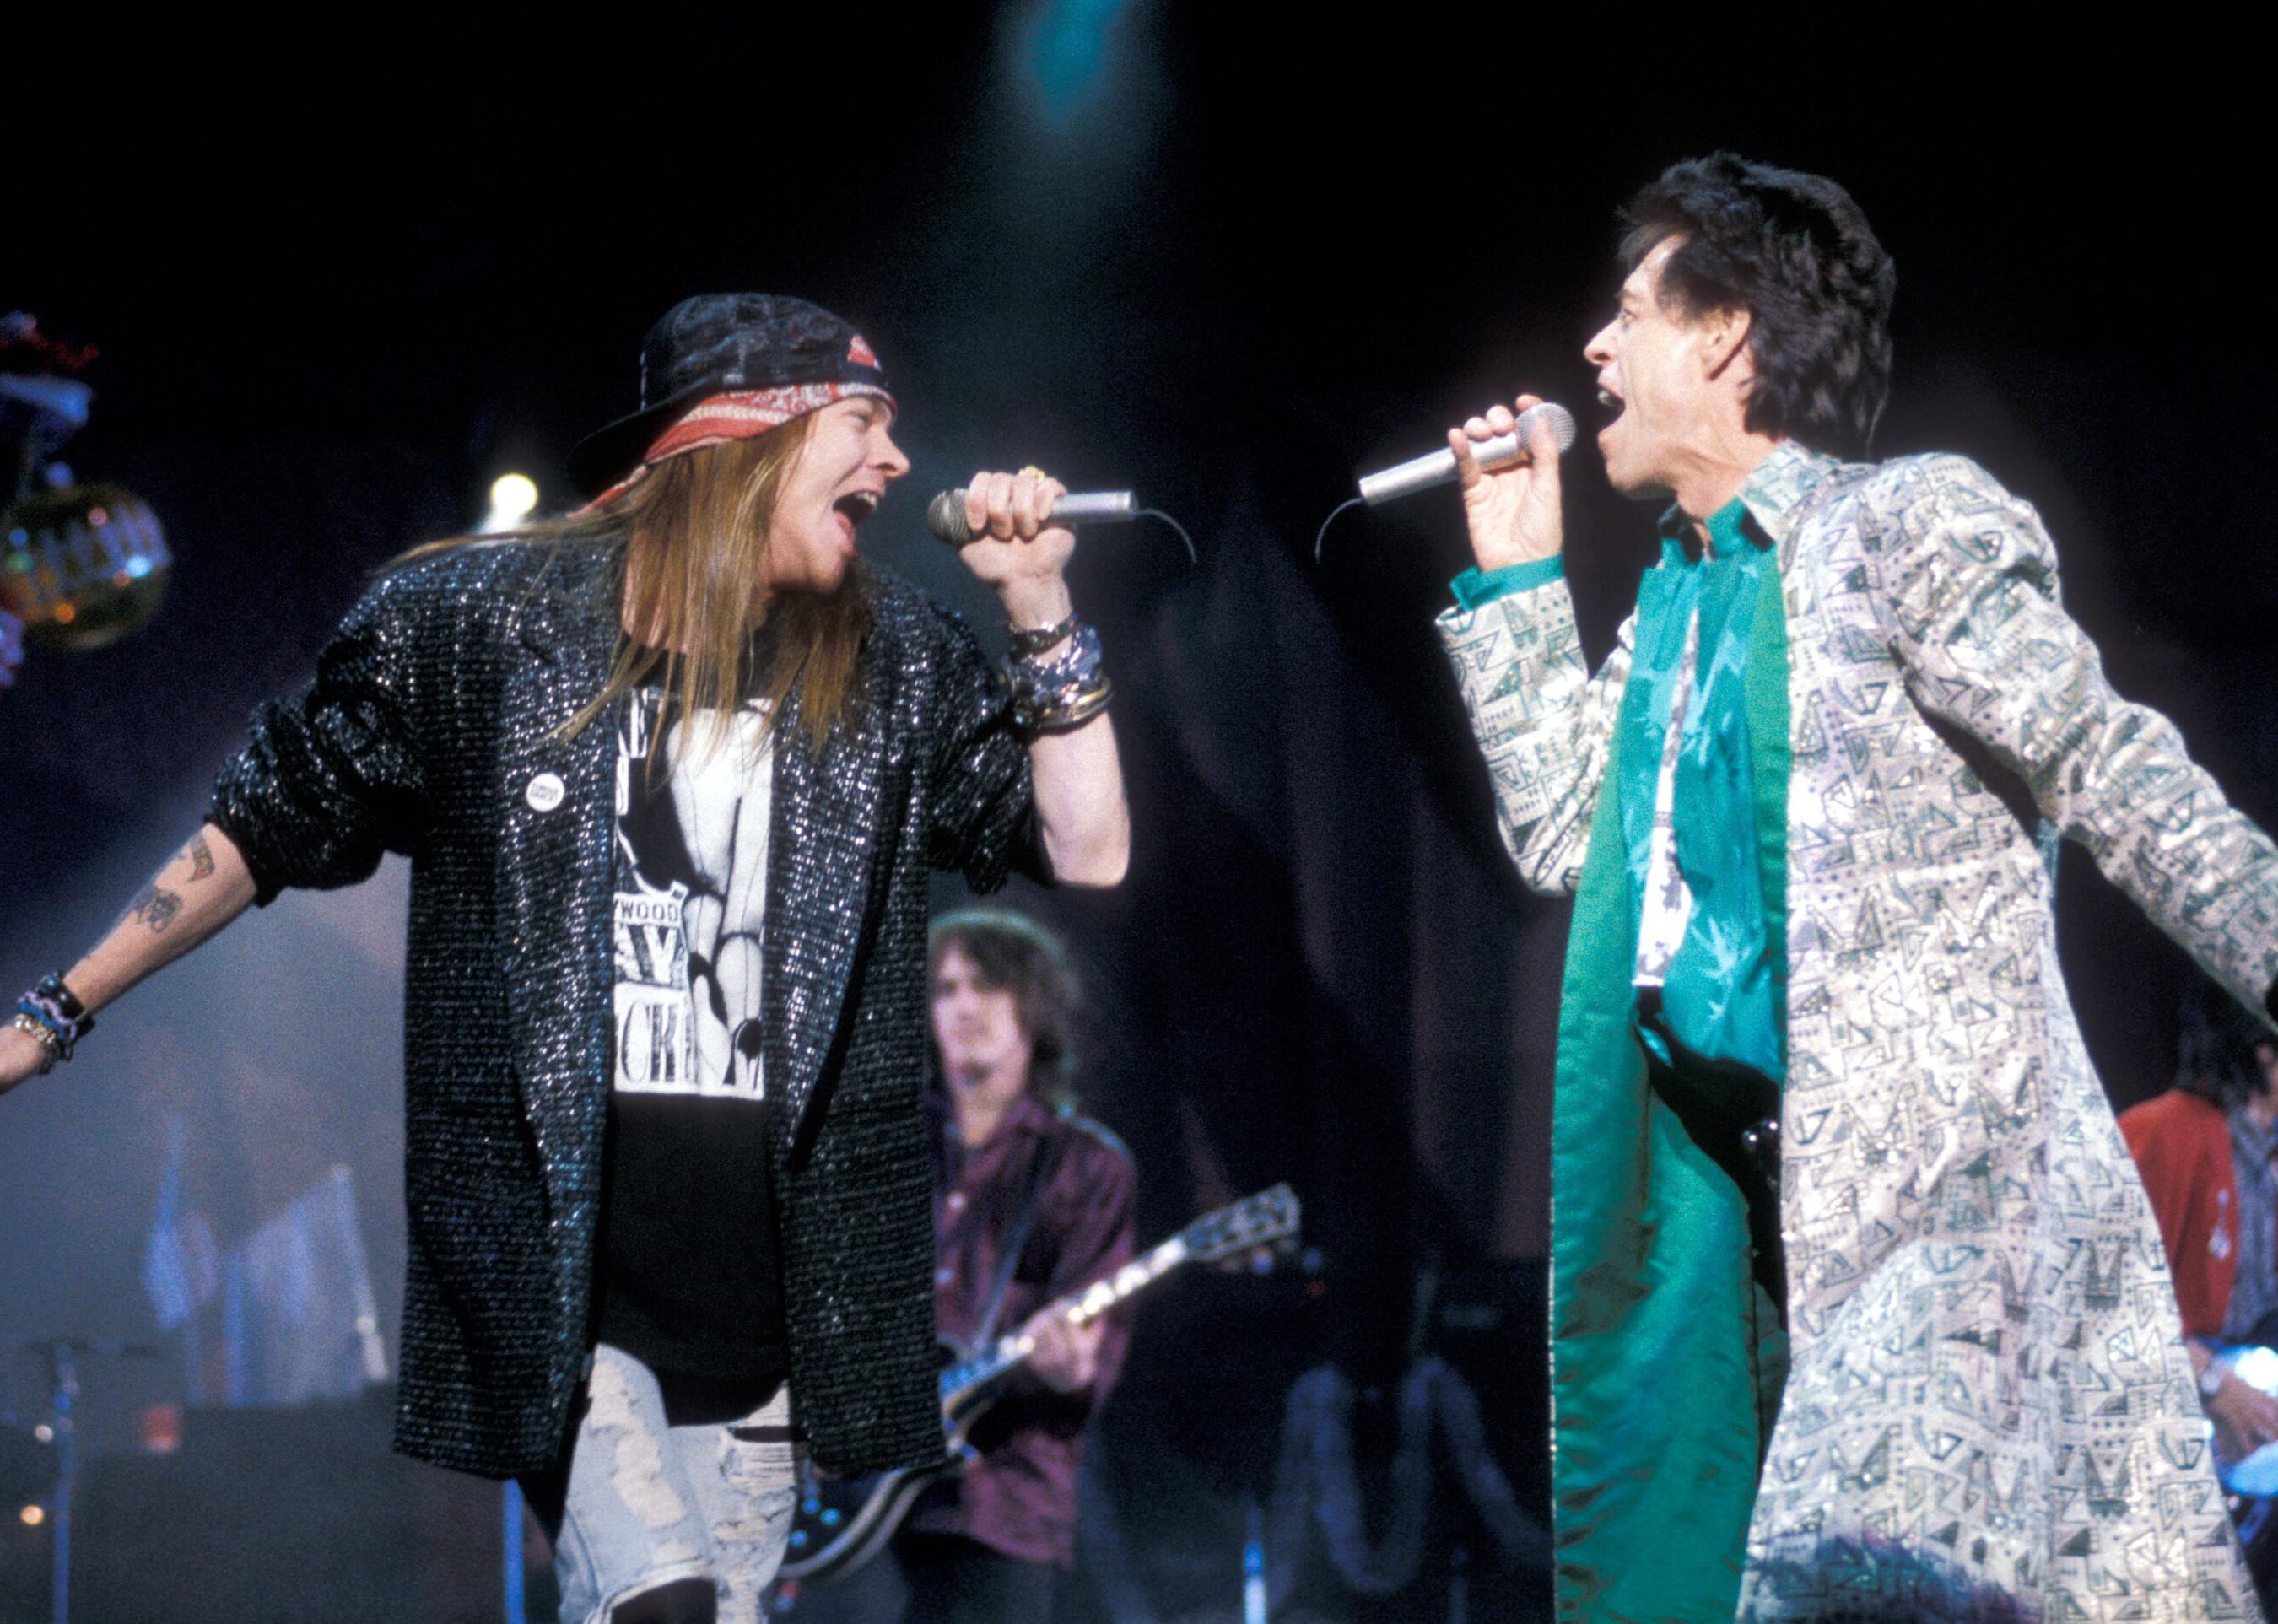 <p>The Rolling Stones have delivered no shortage of impressive concert tours over their decades-long career, including this one from 1989 (and 1990). It marked a live comeback for the band and proved that they could still rock a huge crowd. An infamous show at L.A.'s Memorial Coliseum was disastrous for opening act Guns N' Roses, with <a href="https://ultimateclassicrock.com/guns-n-roses-rolling-stones/">Axl Rose calling out his bandmates for drug use</a> while on stage.</p> <p><strong>You may also like:</strong> <a href="https://stacker.com/music/one-hit-wonders-2000s">One-hit wonders of the 2000s</a></p>